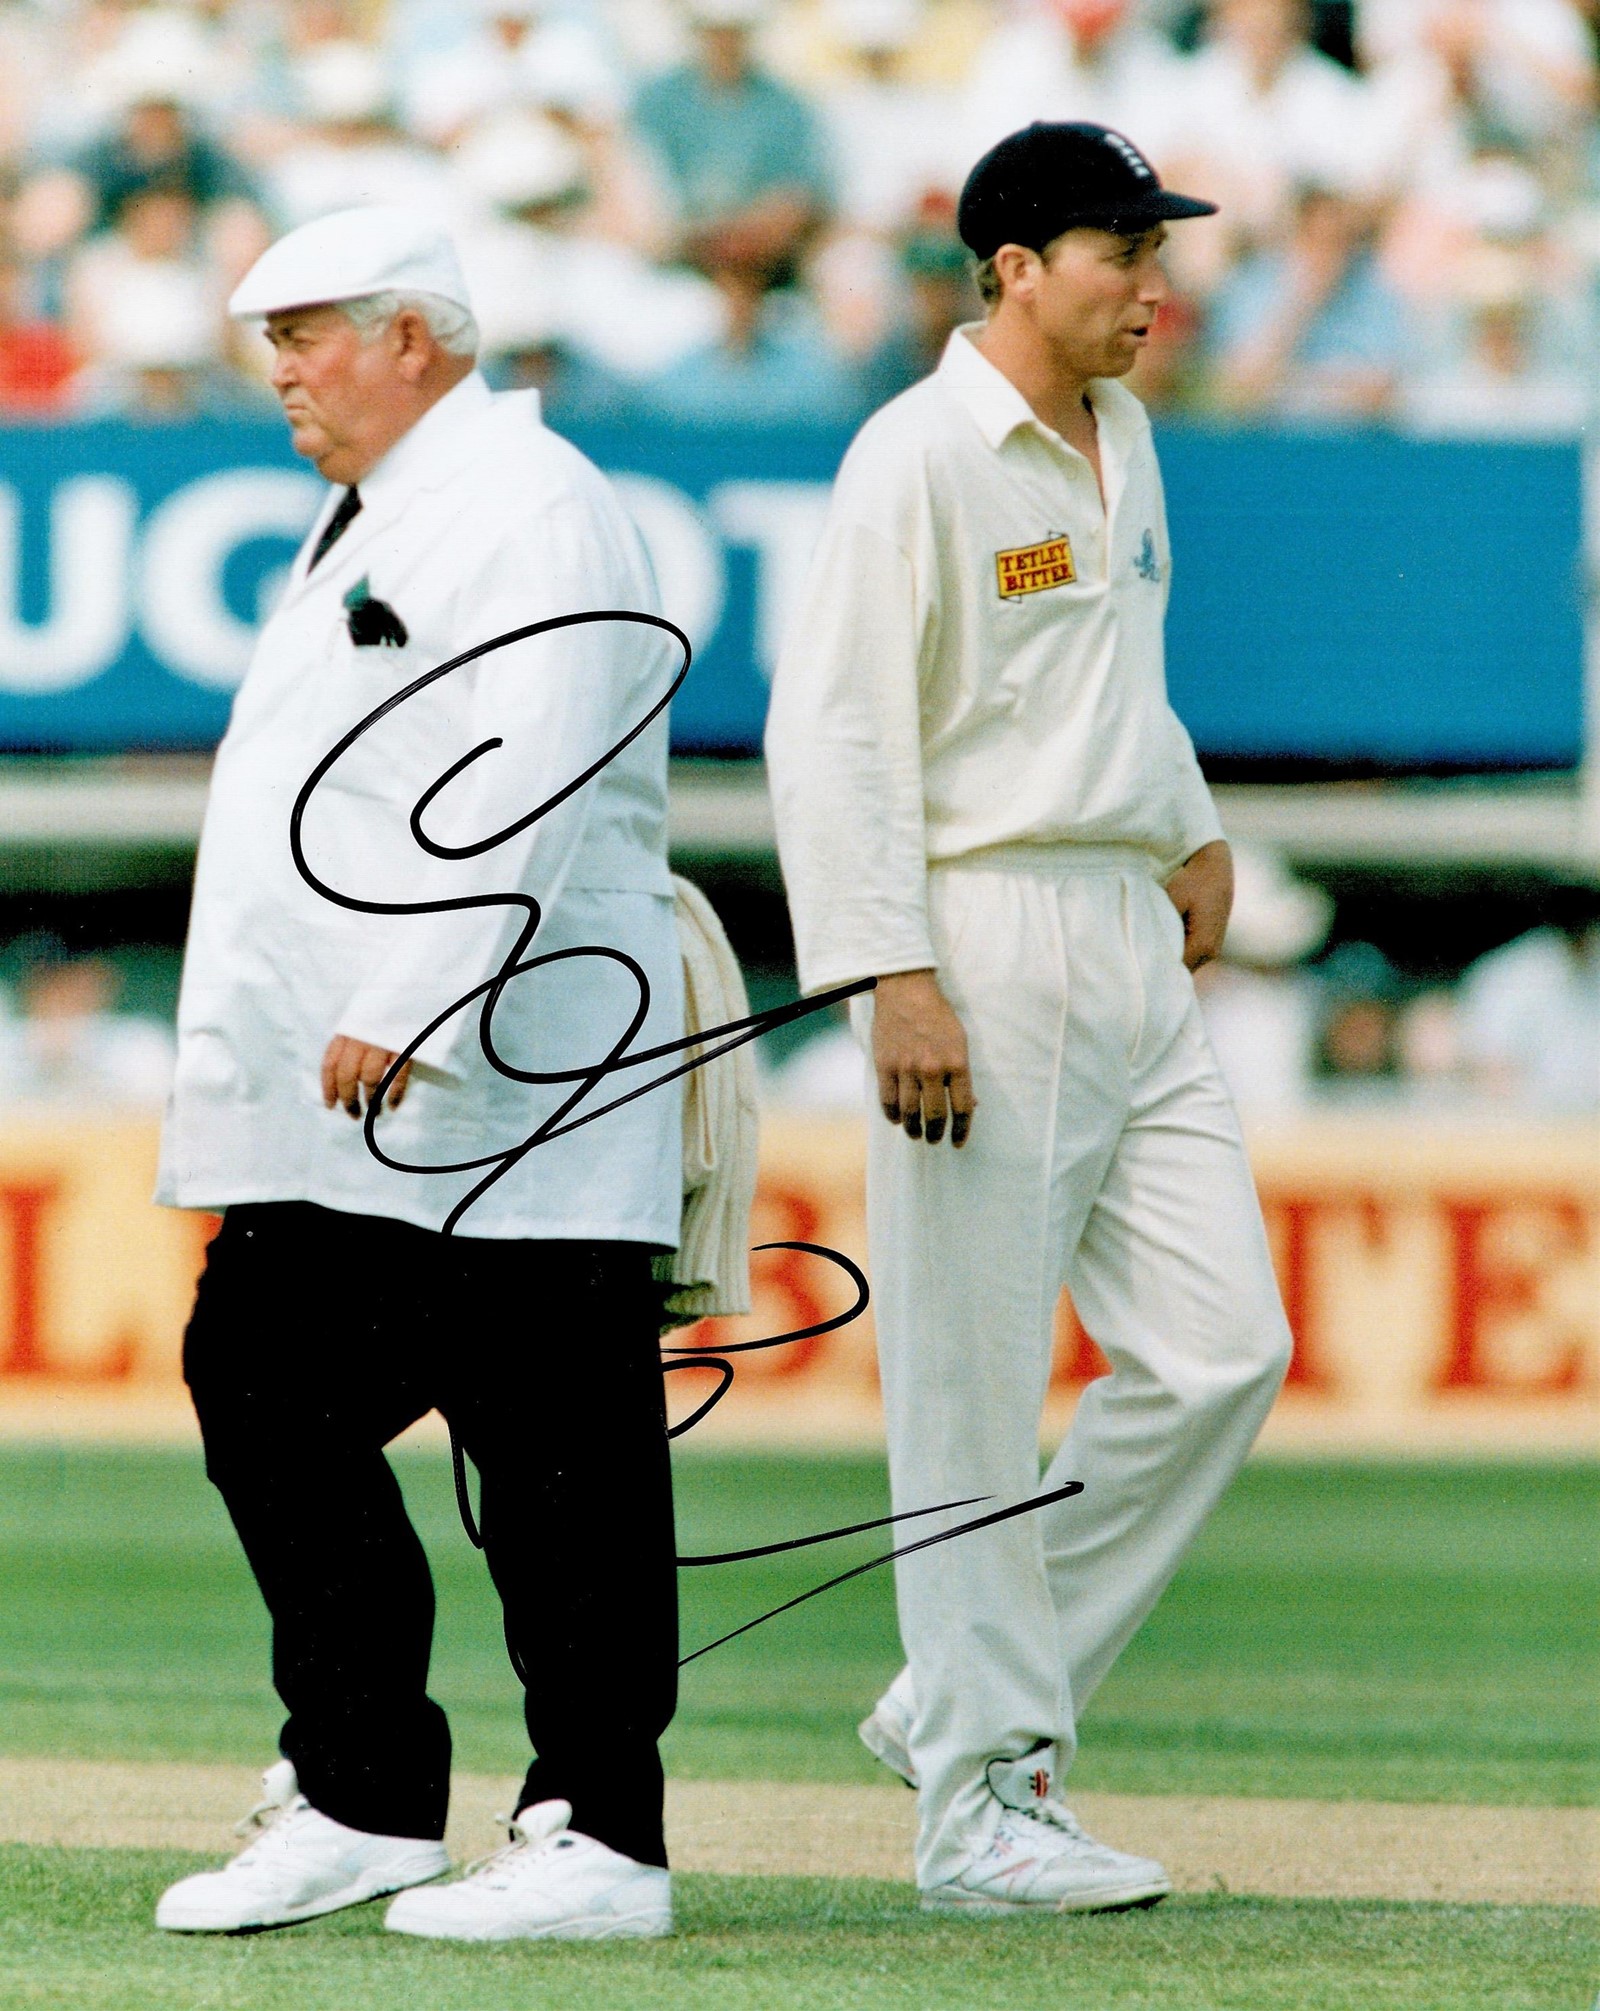 Cricket Mike Atherton signed England 10x8 colour photo. Michael Andrew Atherton OBE (born 23 March